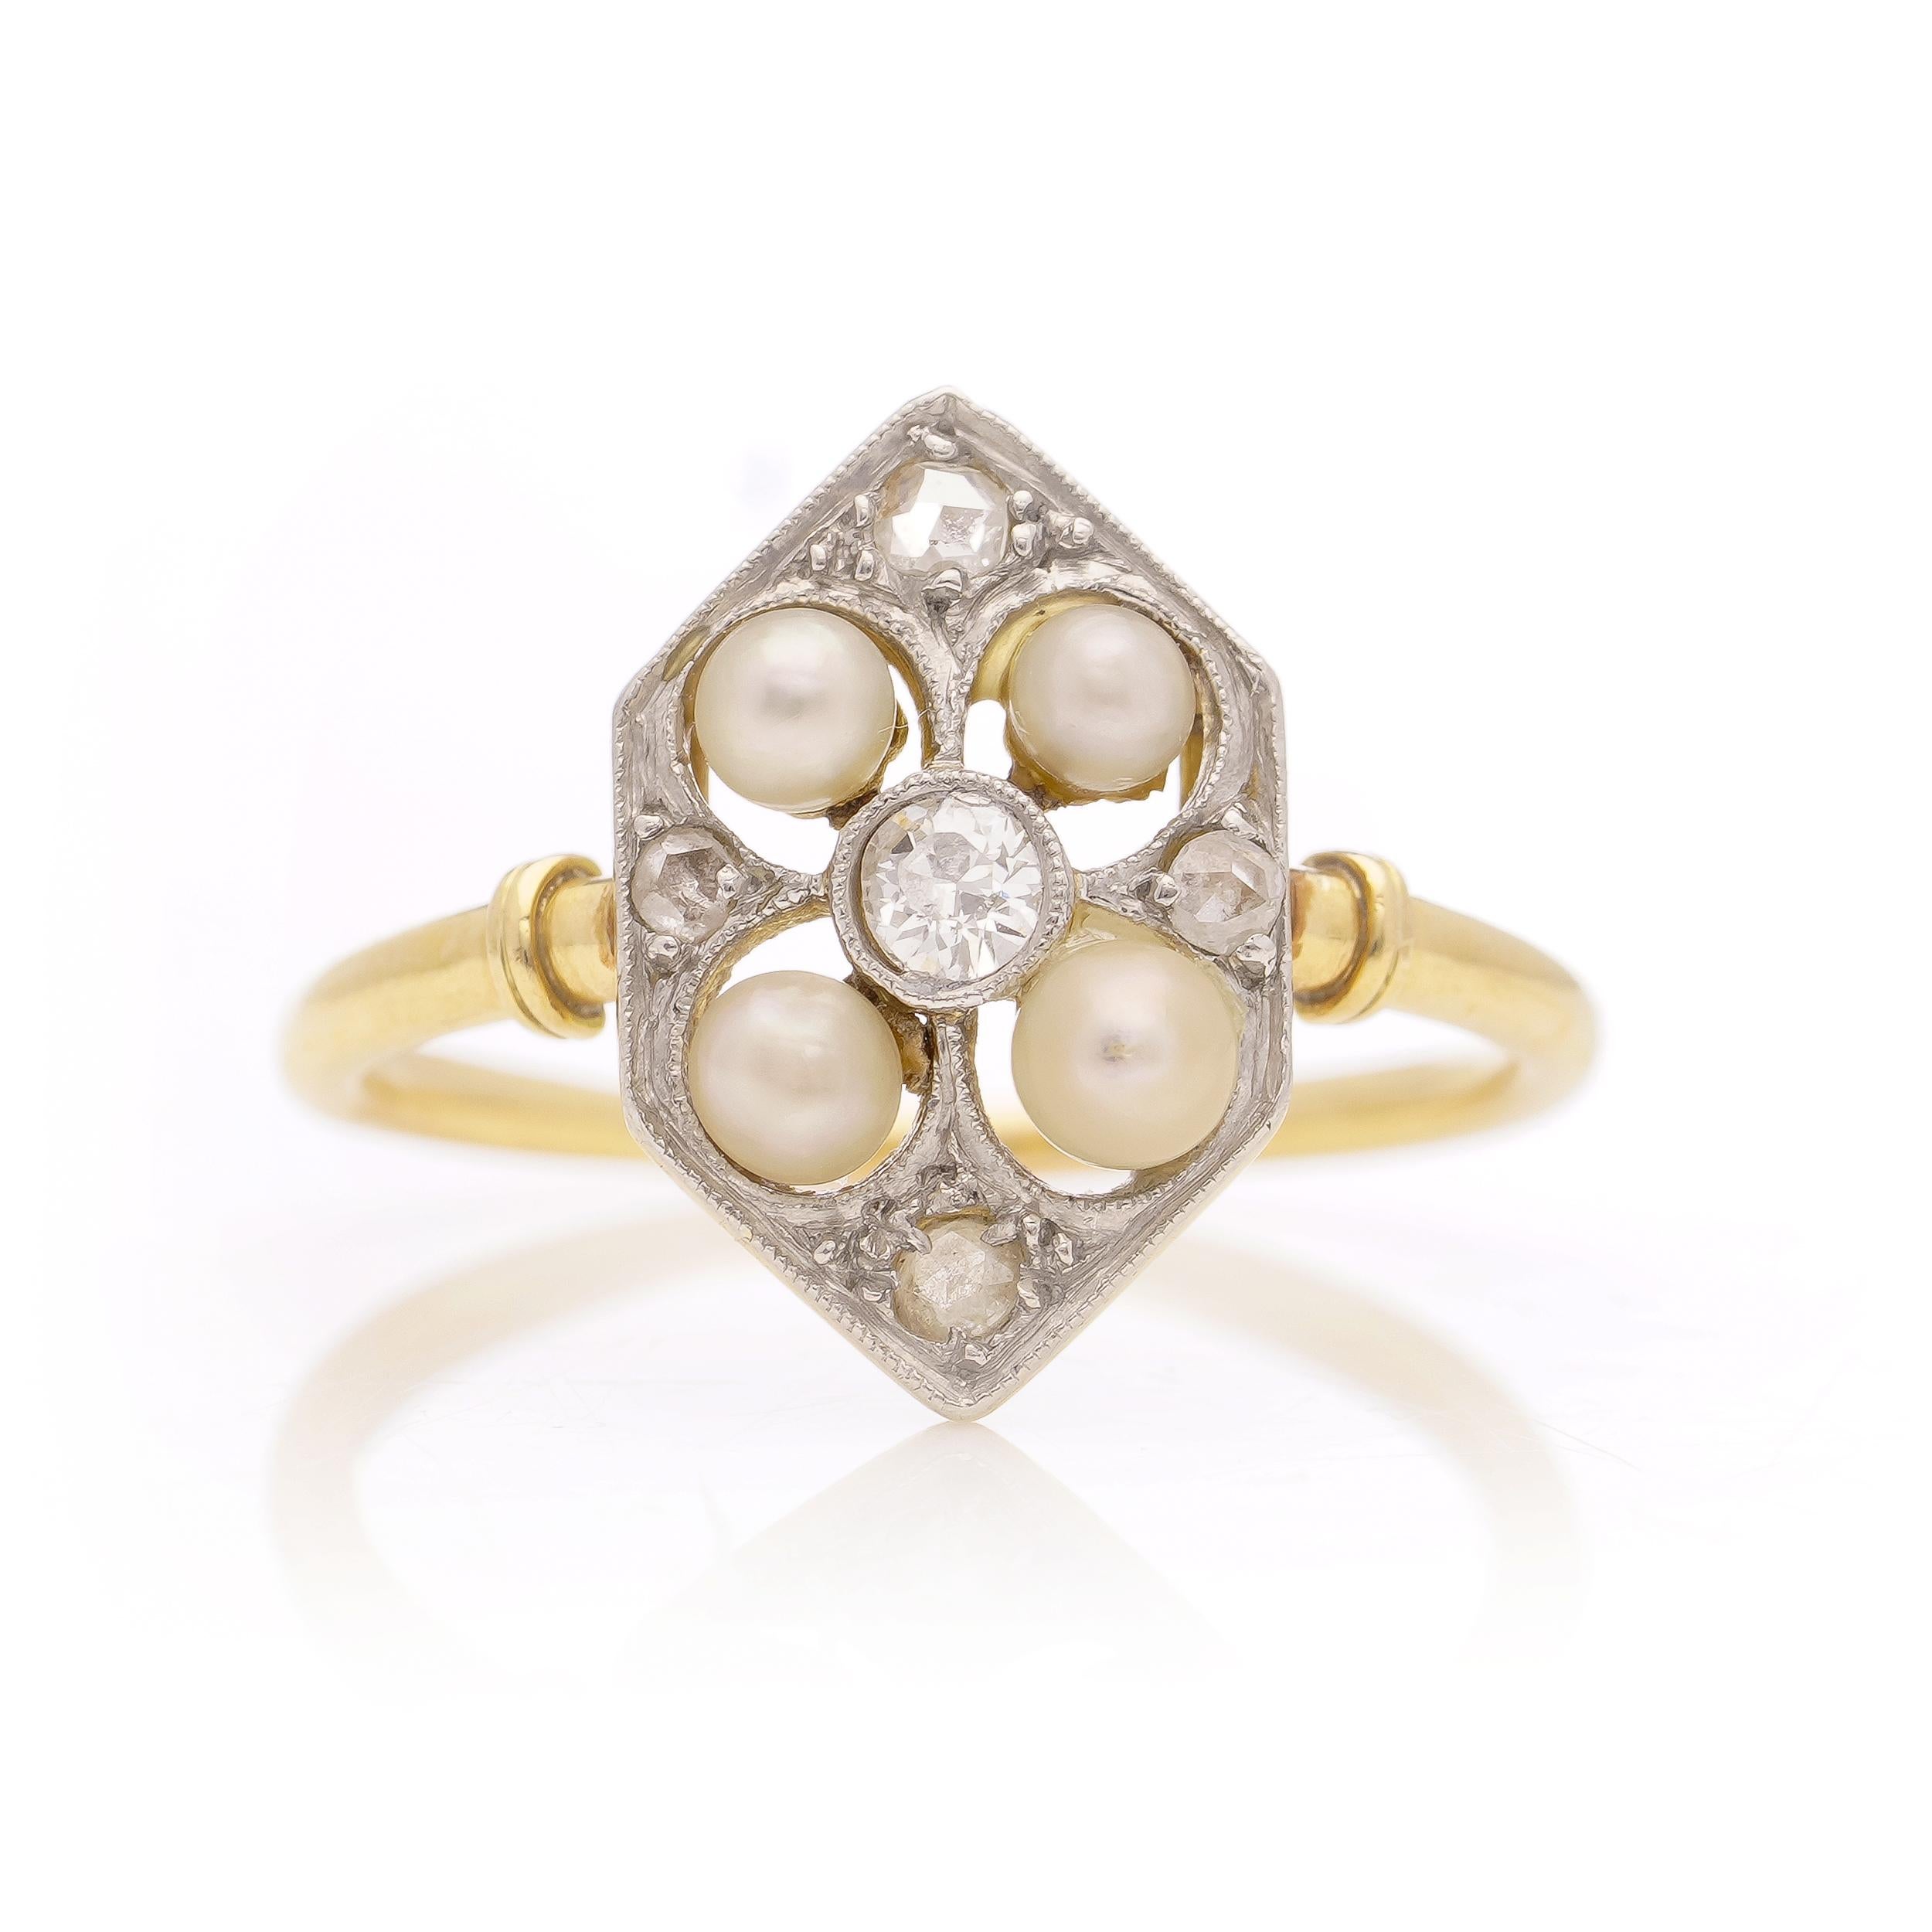 Edwardian 18kt yellow gold and platinum ladies' ring with diamonds and pearls  For Sale 3